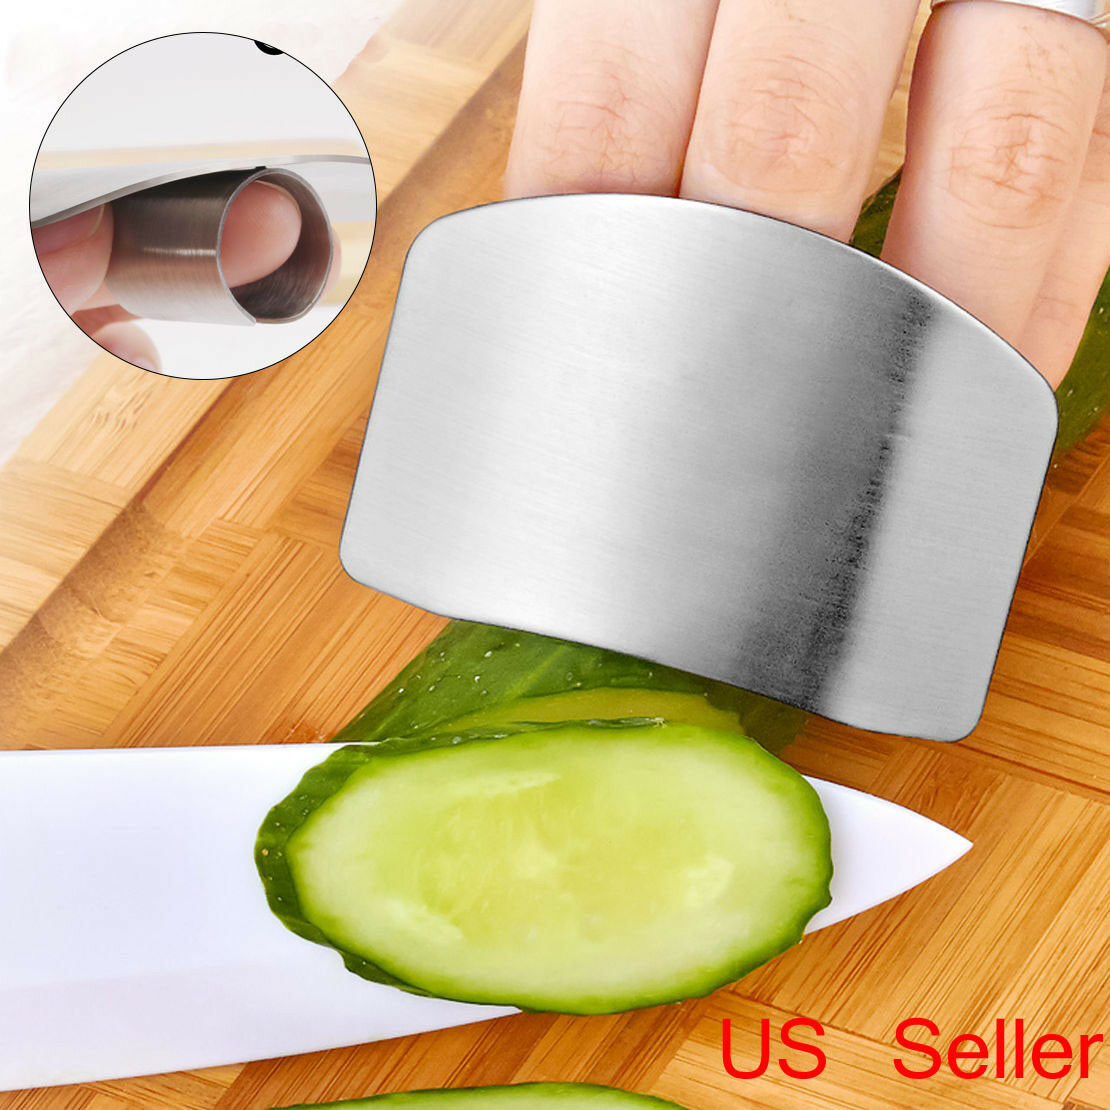 Finger Guard for Safe to Slice Cutting - Family Friendly Furniture